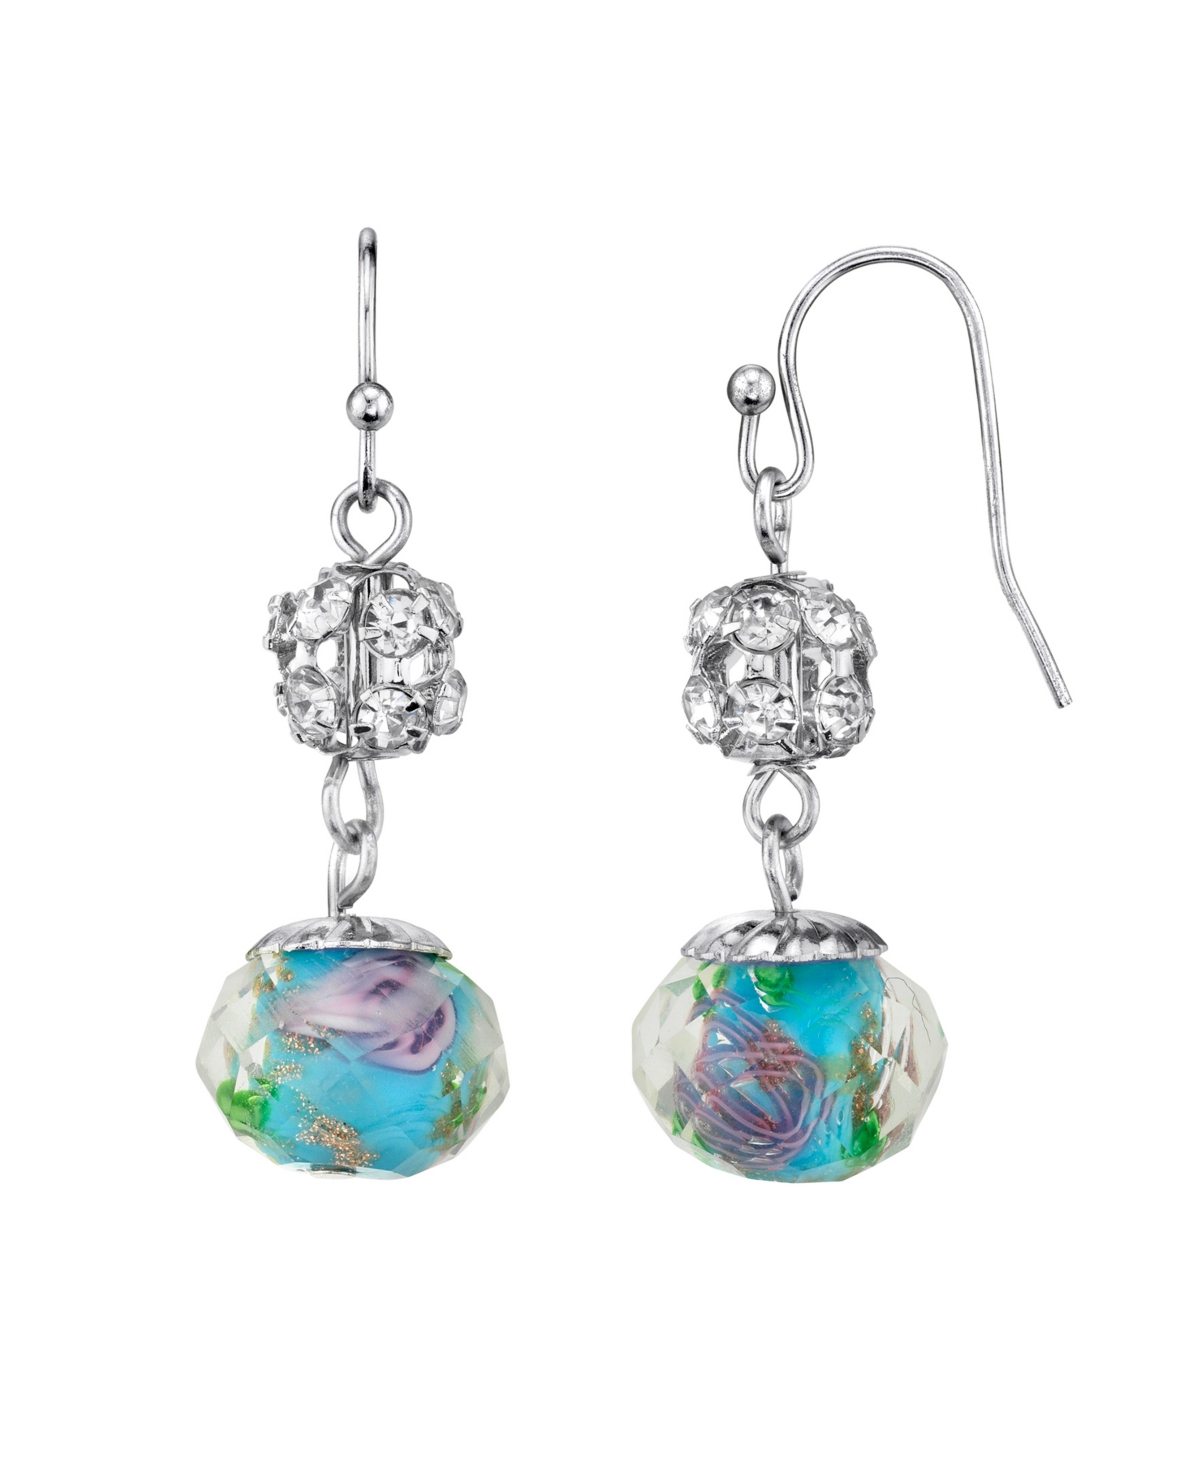 2028 Silver Tone Aqua And Pink Flower Bead With Crystals Drop Wire Earring In Blue